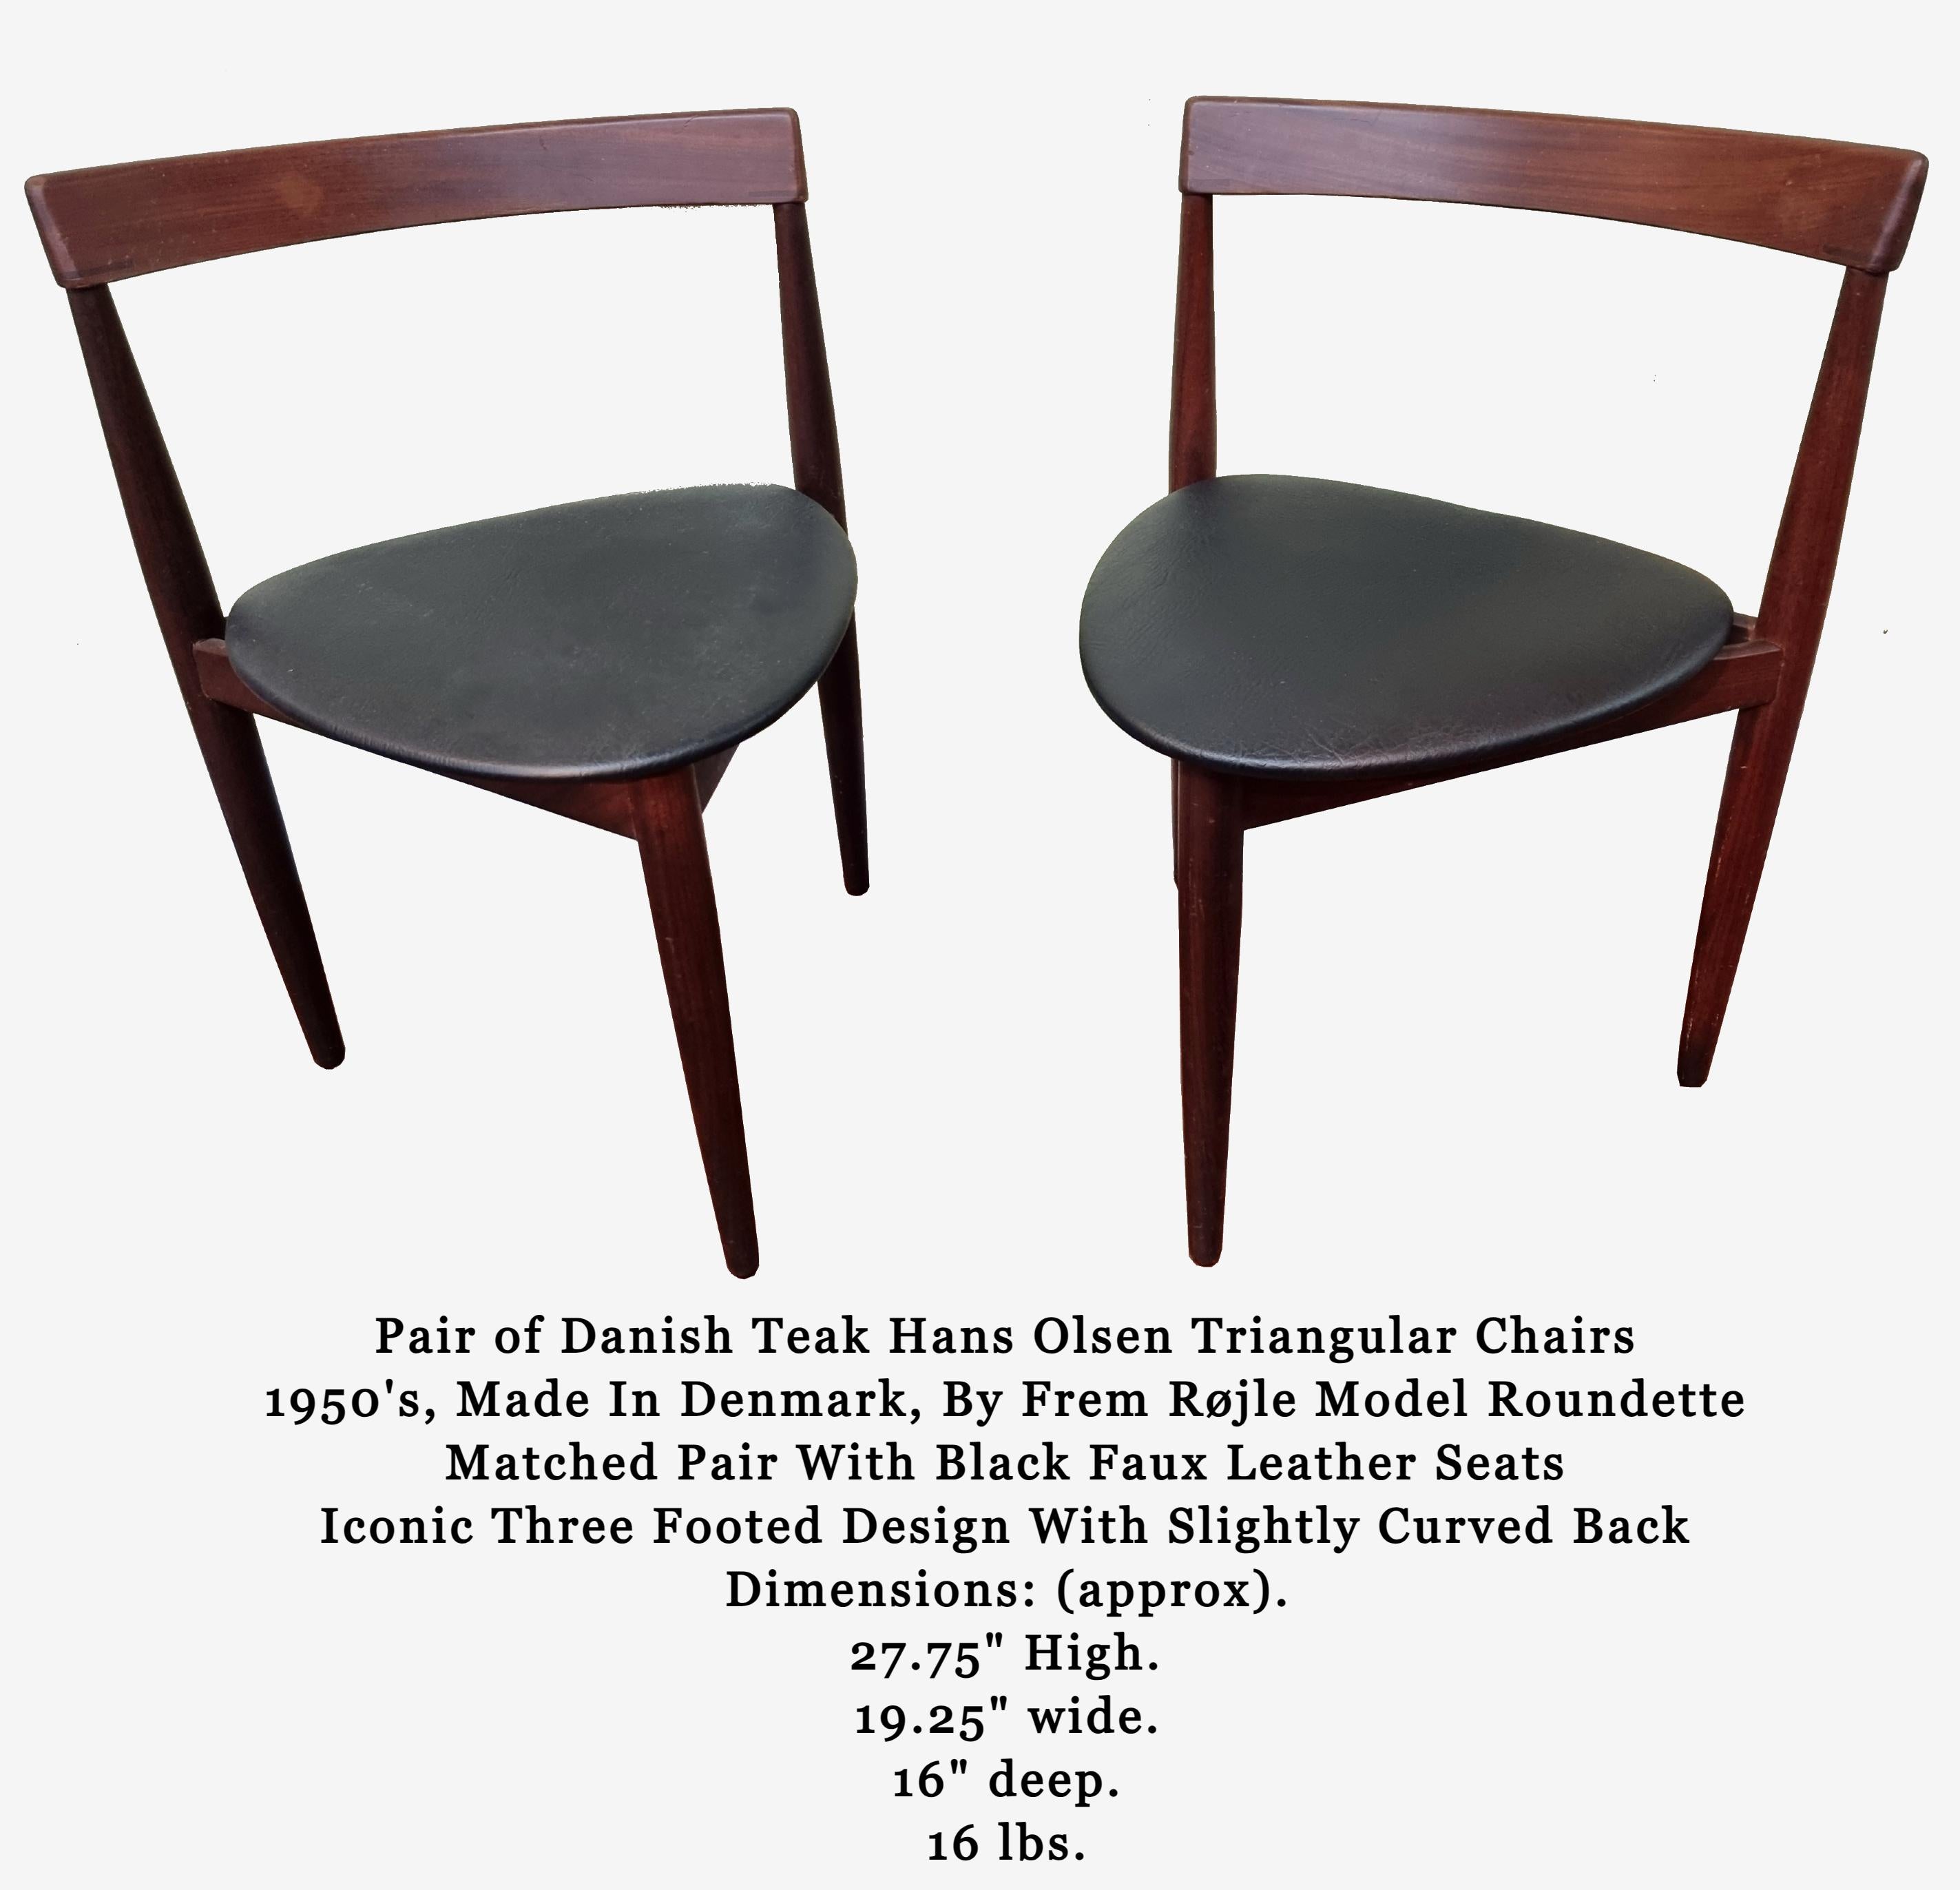 Pair of Danish Teak Hans Olsen Triangular Chairs 1950's, Made In Denmark, By Frem Røjle Model Roundette.
Matched Pair With Black Faux Leather Seats
Iconic Three Footed Design With Slightly Curved Back.

Dimensions: (approx).
27.75